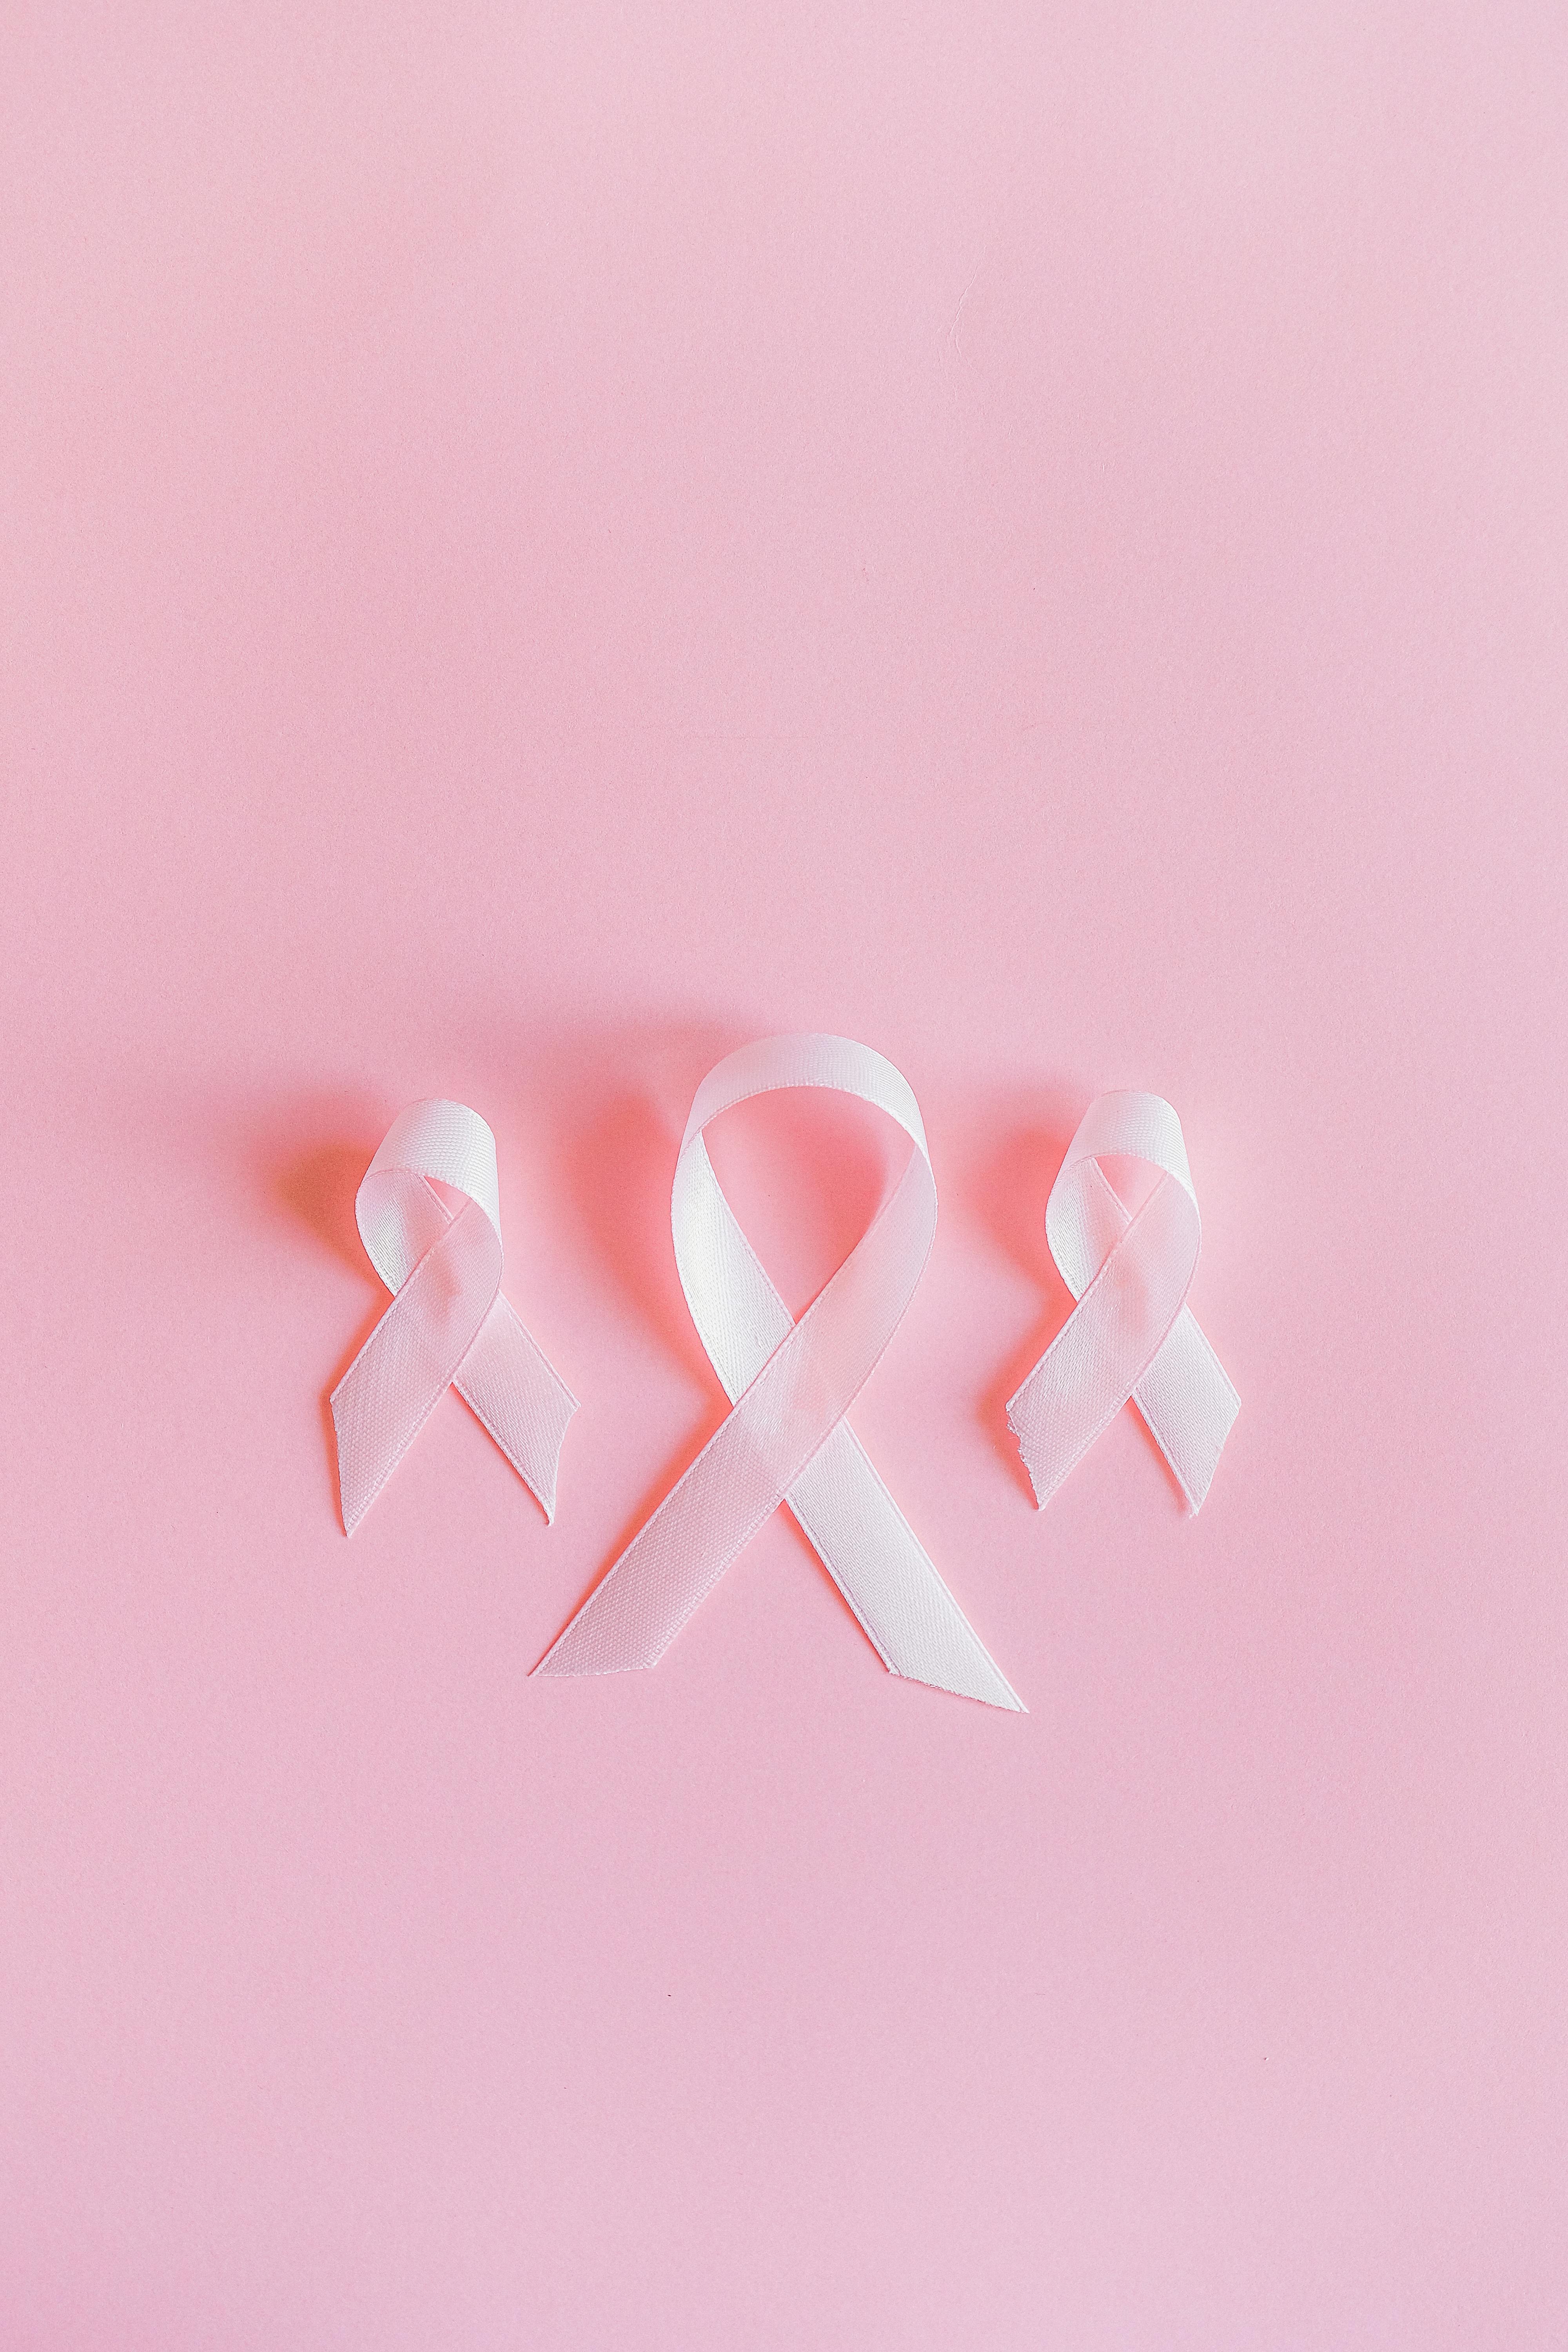 Breast Cancer Ribbon Pictures  Download Free Images on Unsplash